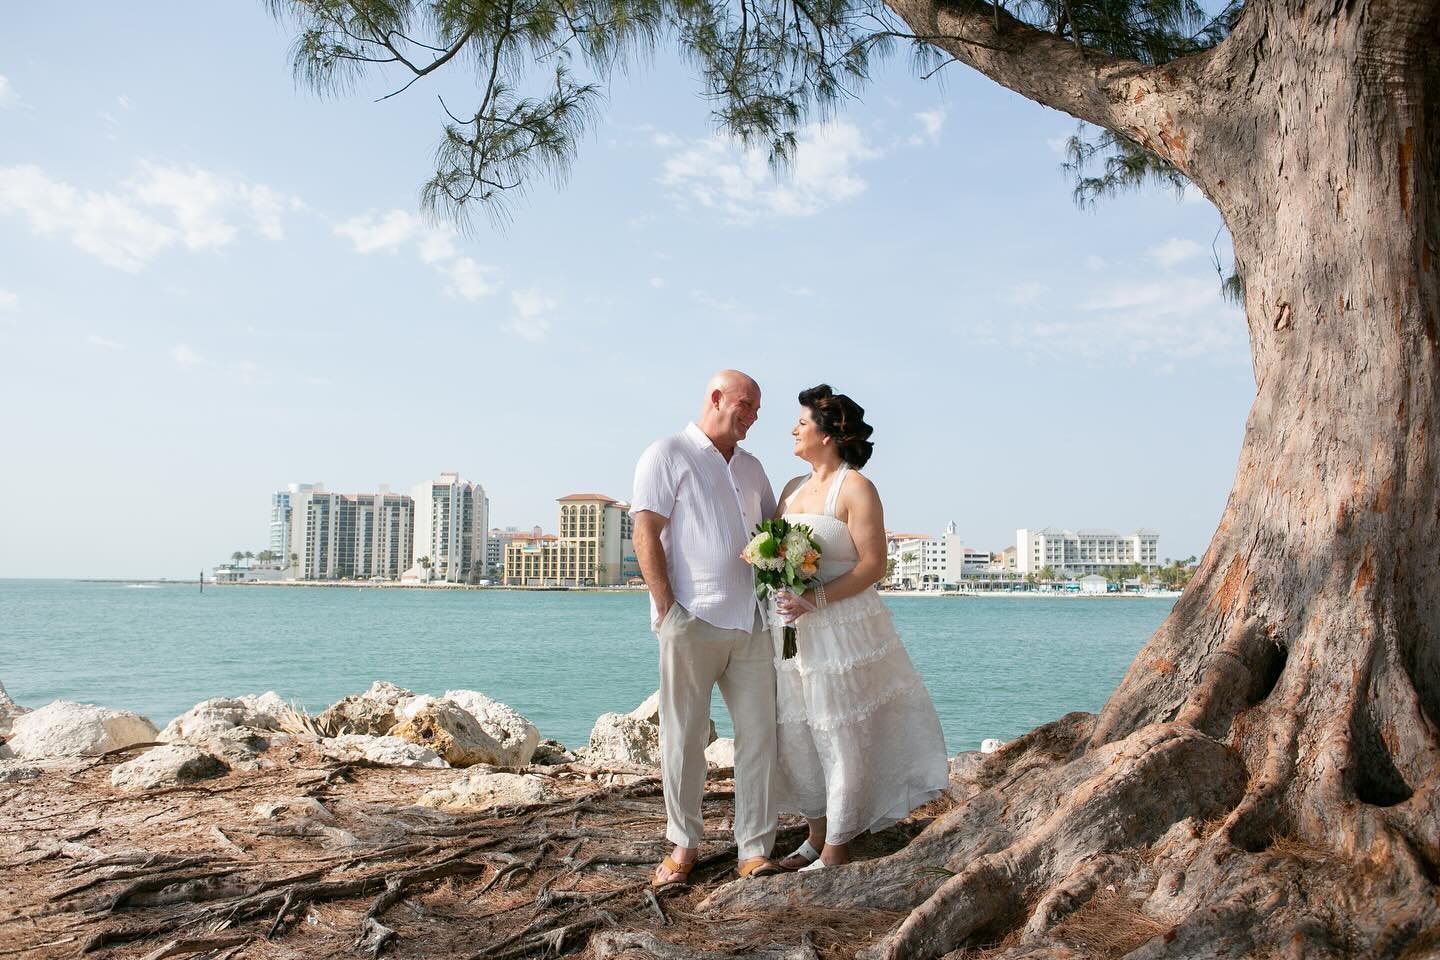 Melissa &amp; Christopher&rsquo;s intimate Sand Key Beach wedding was pure magic! One of my favorite touches? Melissa asked all their guests to wear light colors, creating the most beautifully coordinated and serene photos. The love, the joy, and the